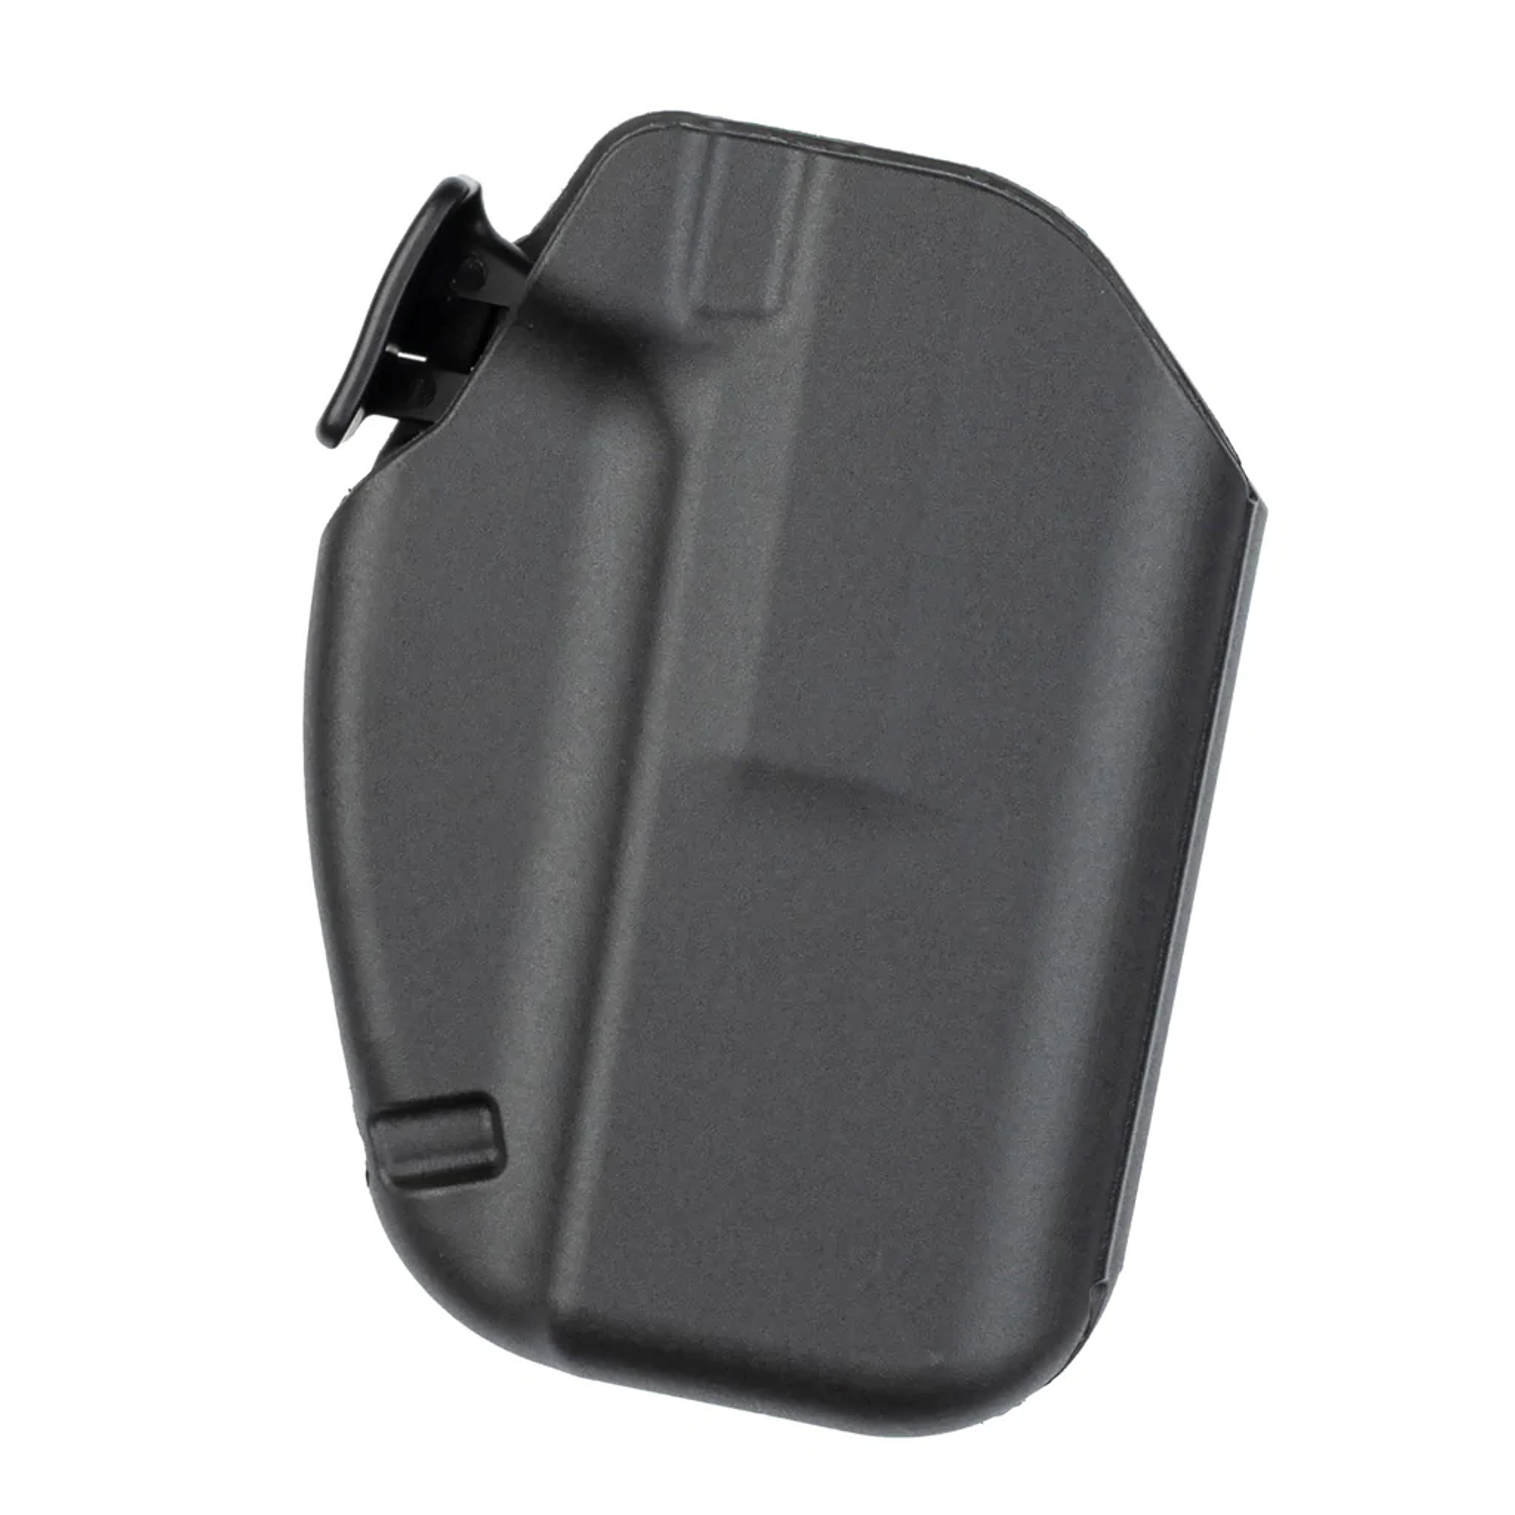 Model 571 Gls Slim Pro-fit Concealment Holster W/ Micro Paddle For Glock 43